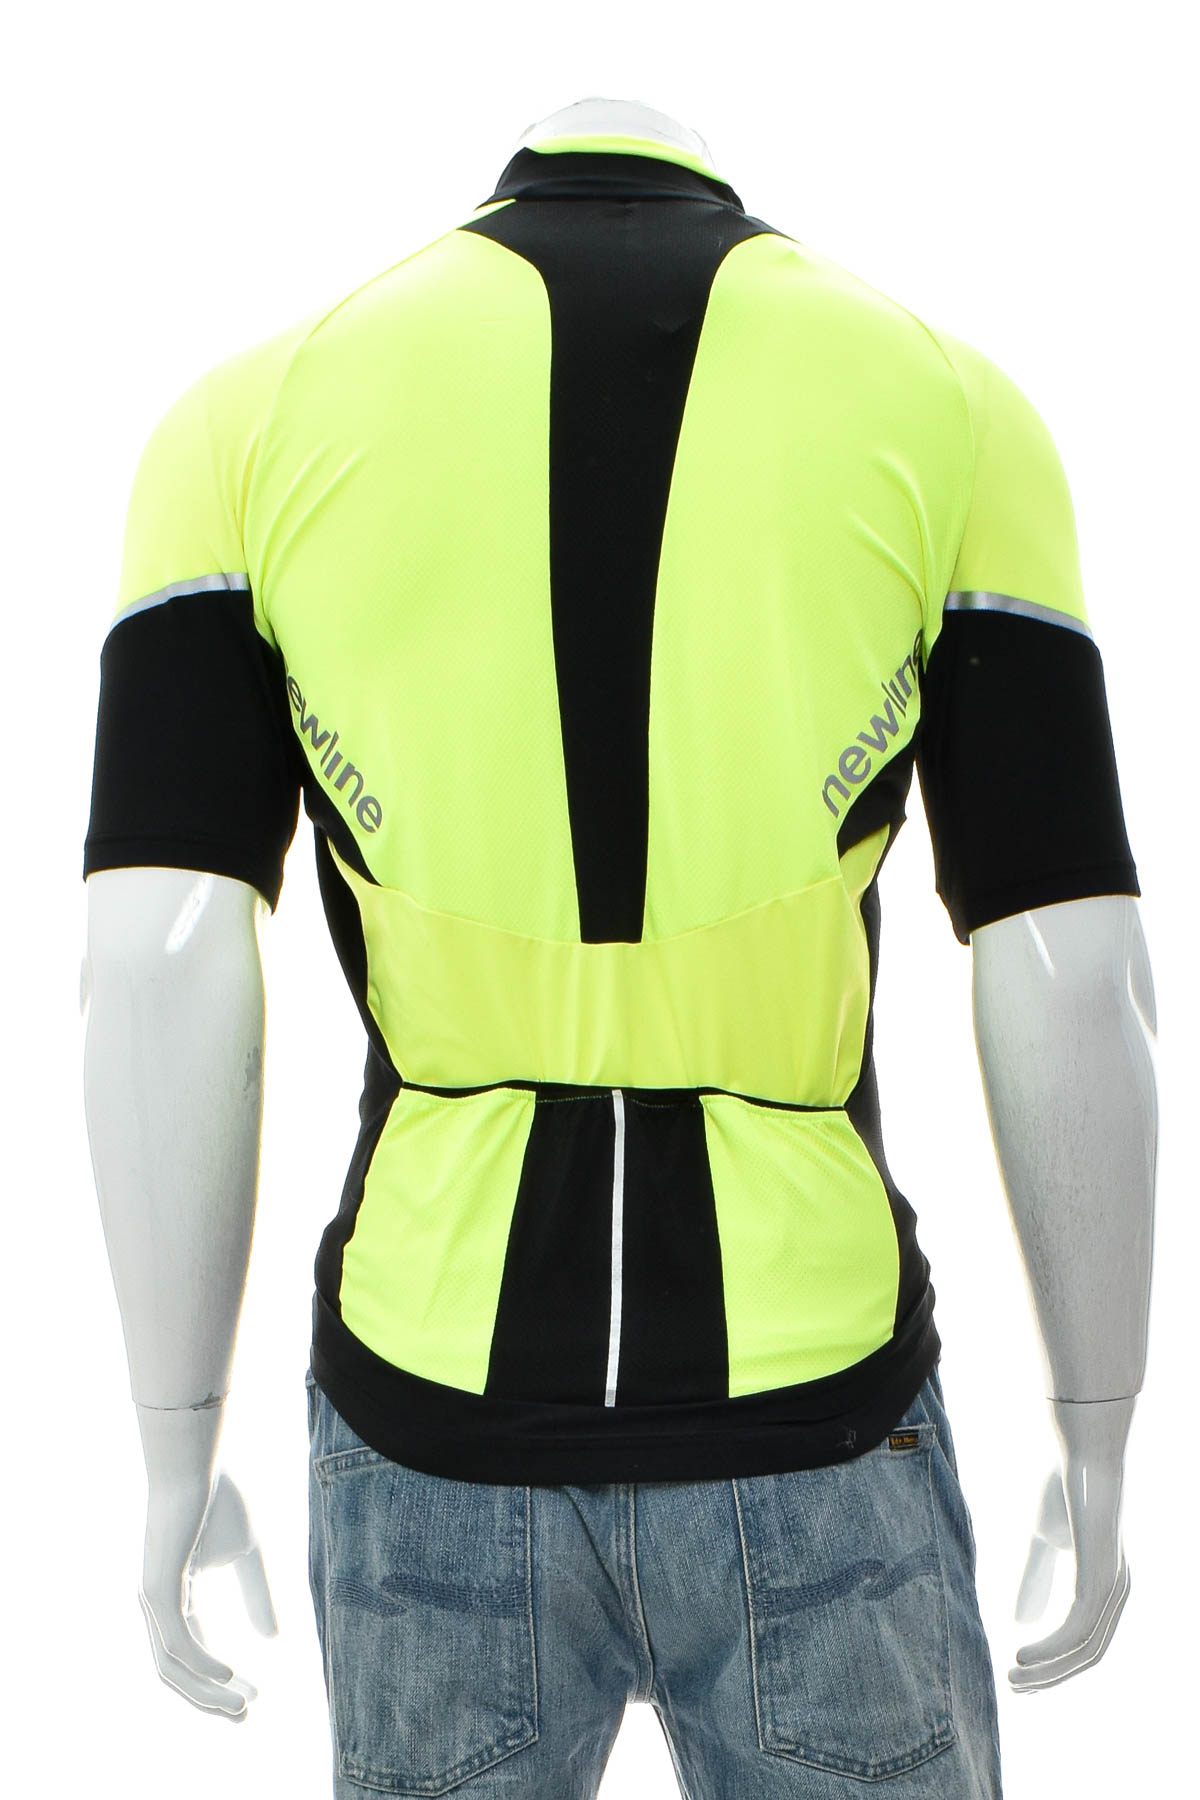 Male sports top for cycling - Newline - 1